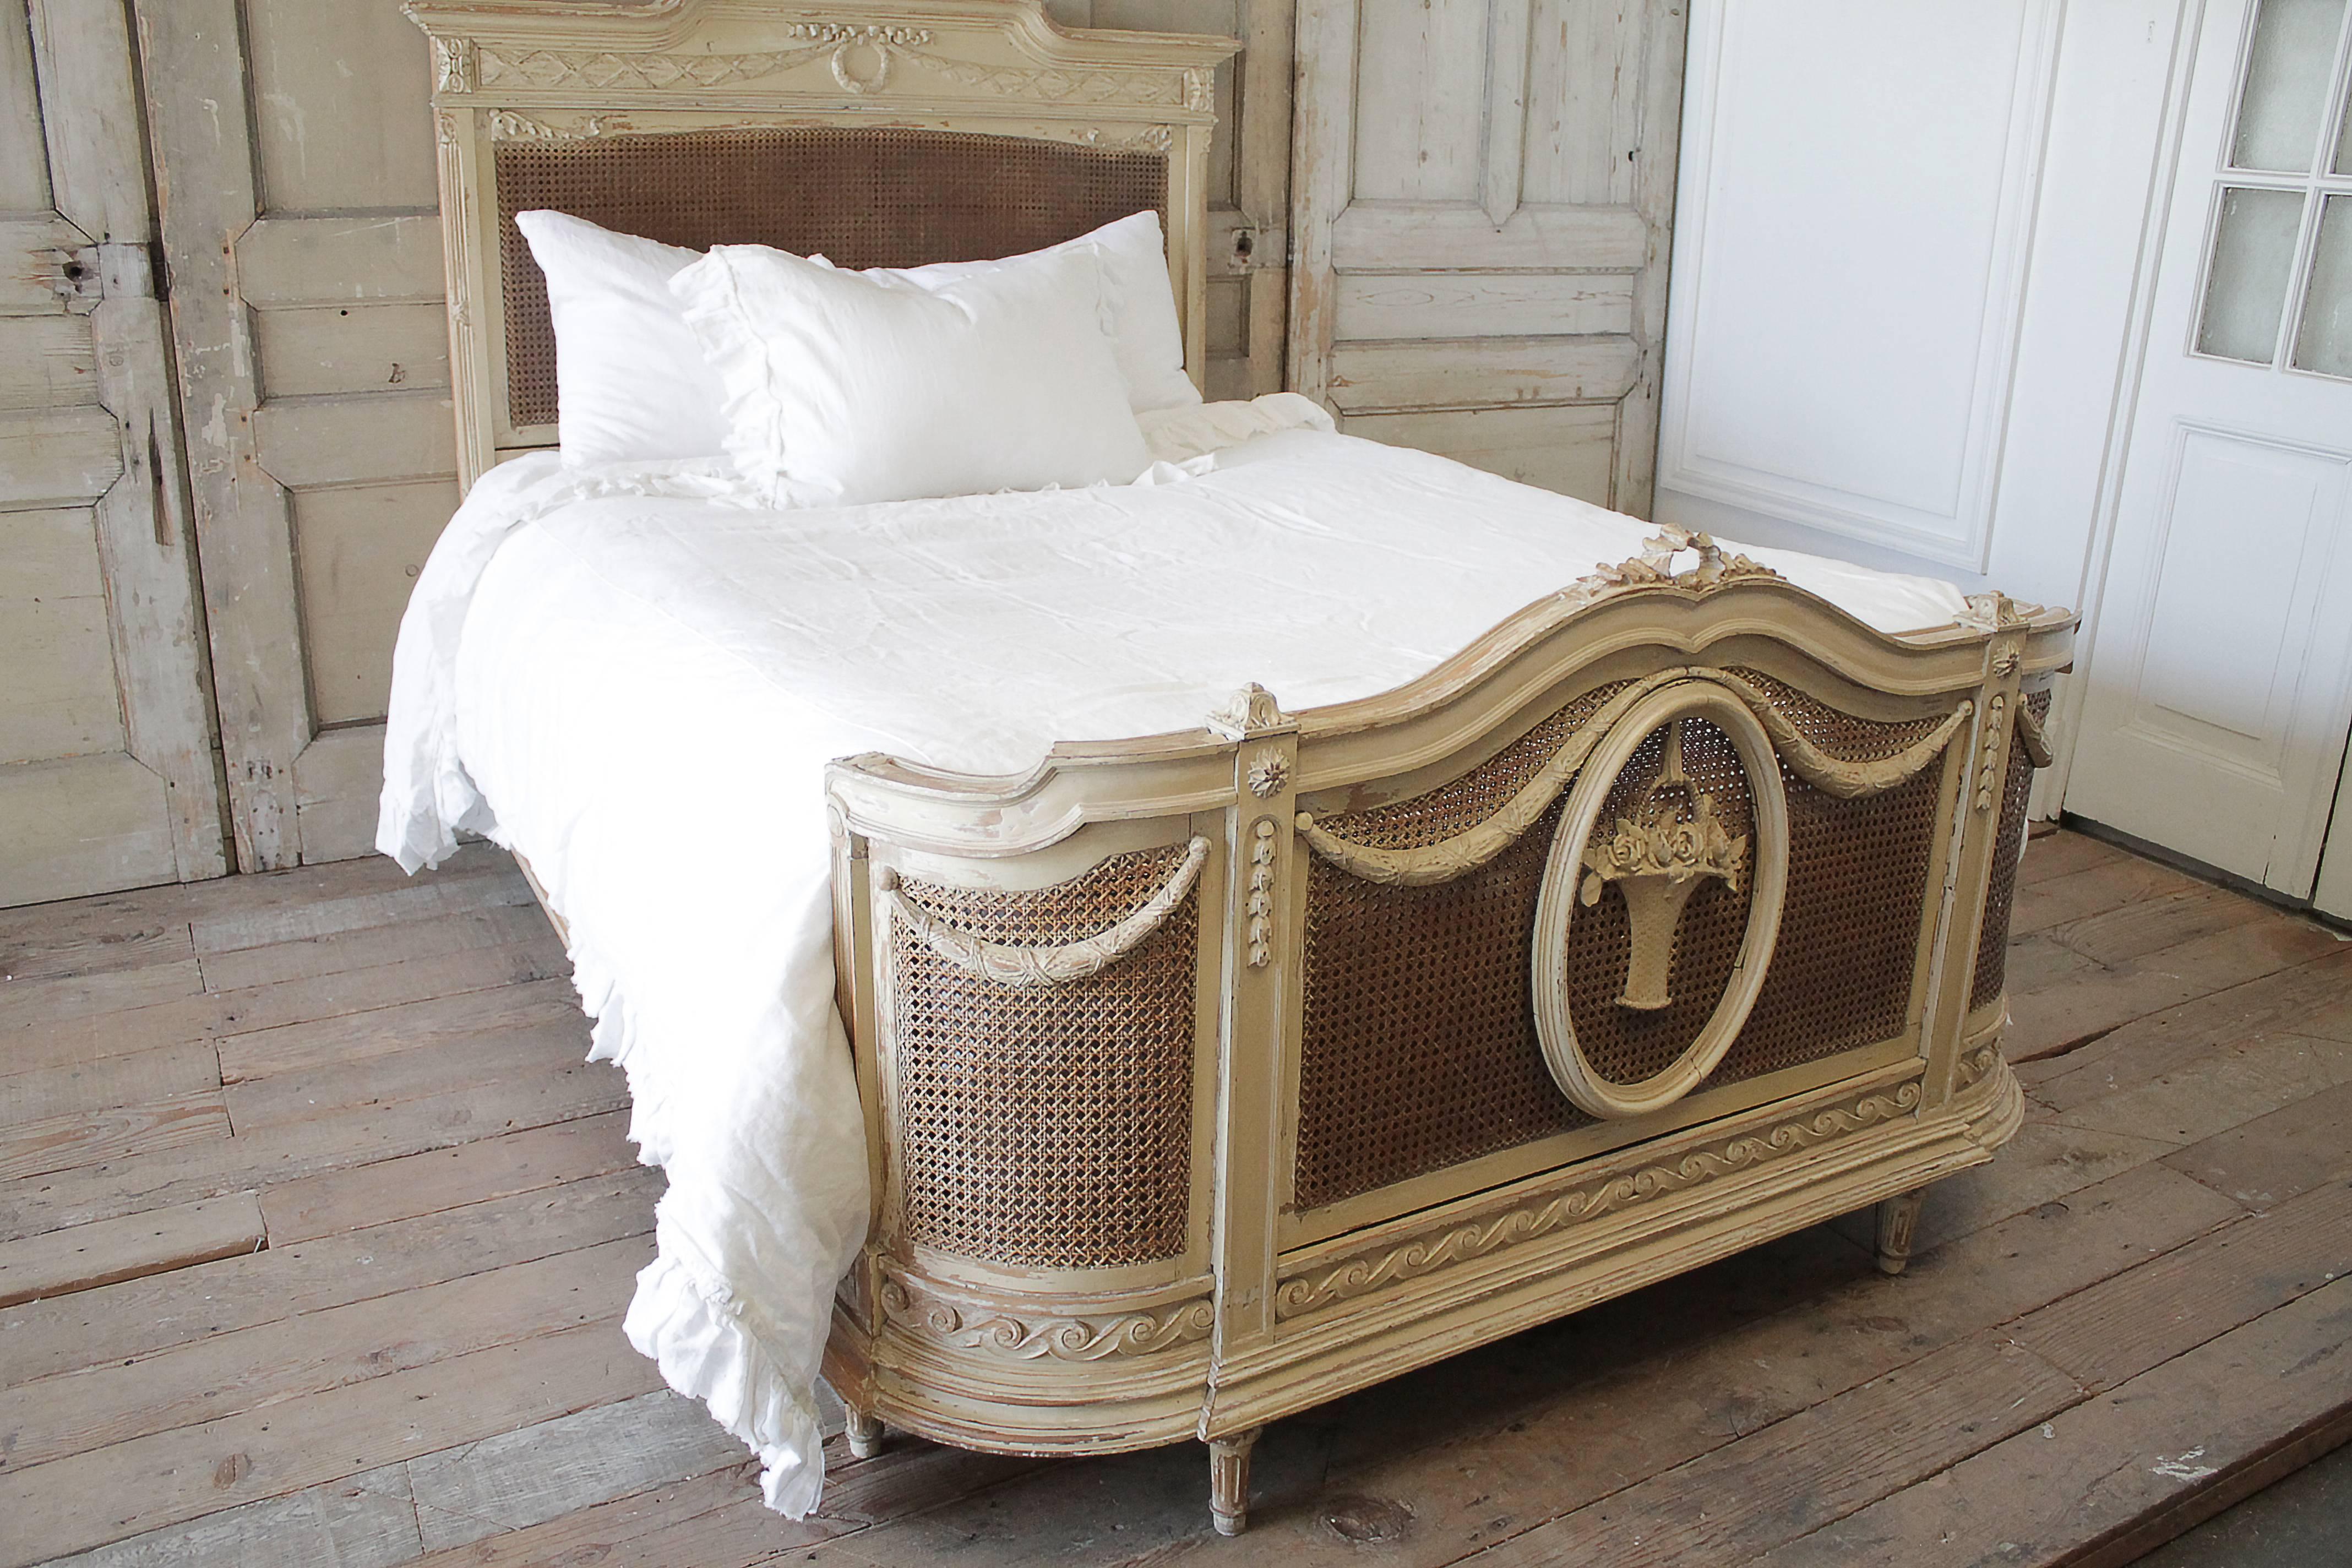 Beautiful original painted French country style cane bed. Creamy colored, with wonderful aged patina, creamy white and wood tones peeking through the paint and double caned footboard. Cane is in good condition, no major holes or breaks, just a